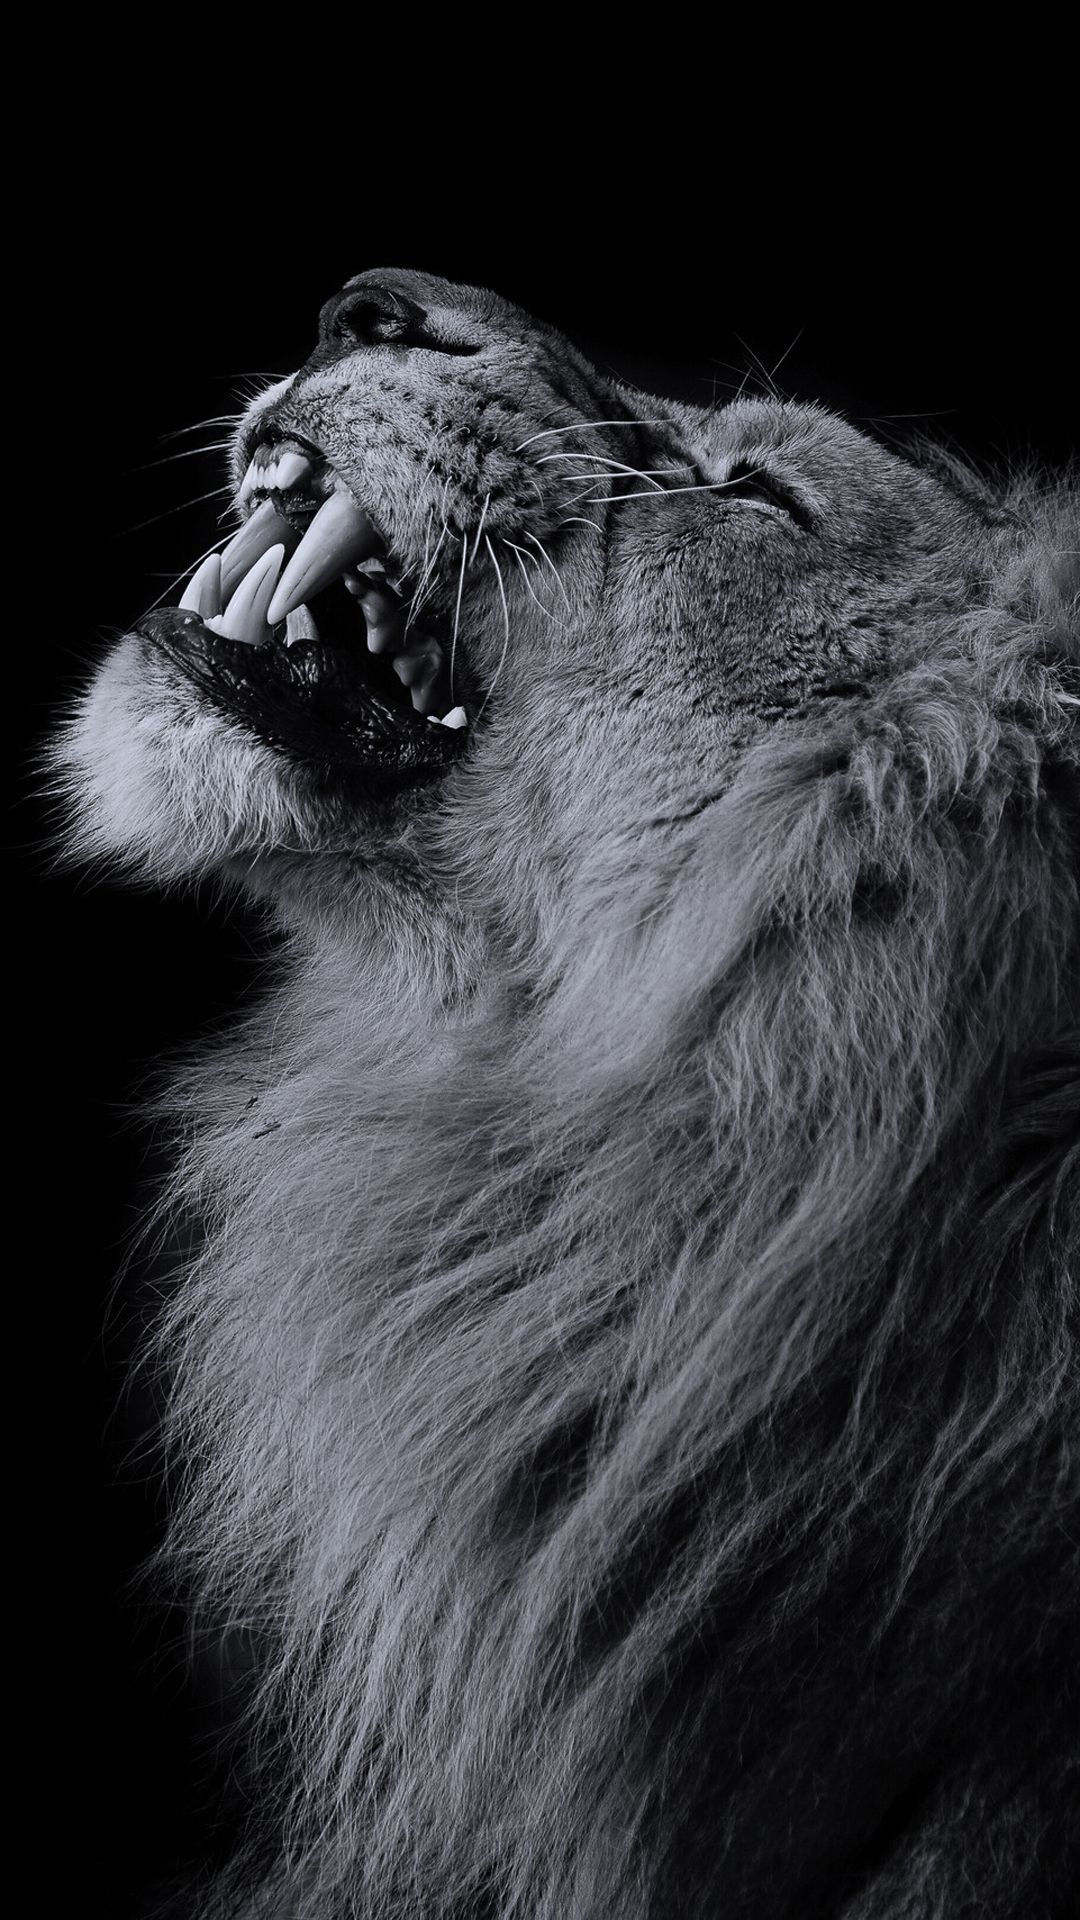 Lion Wallpaper (best Lion Wallpaper and image) on WallpaperChat